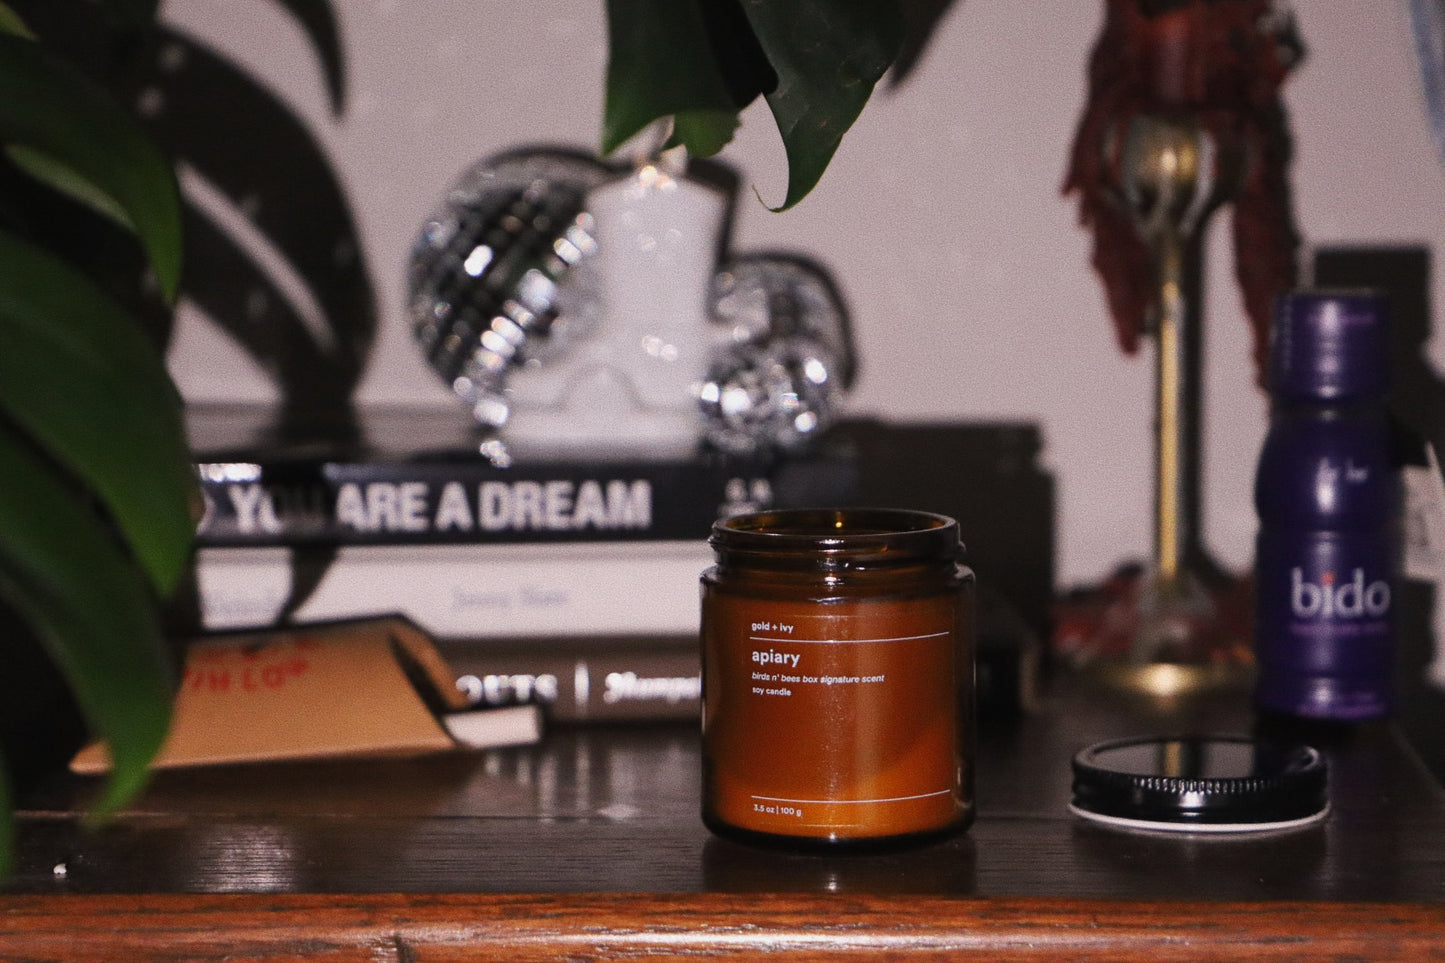 Candle- Signature Scent "Apiary"